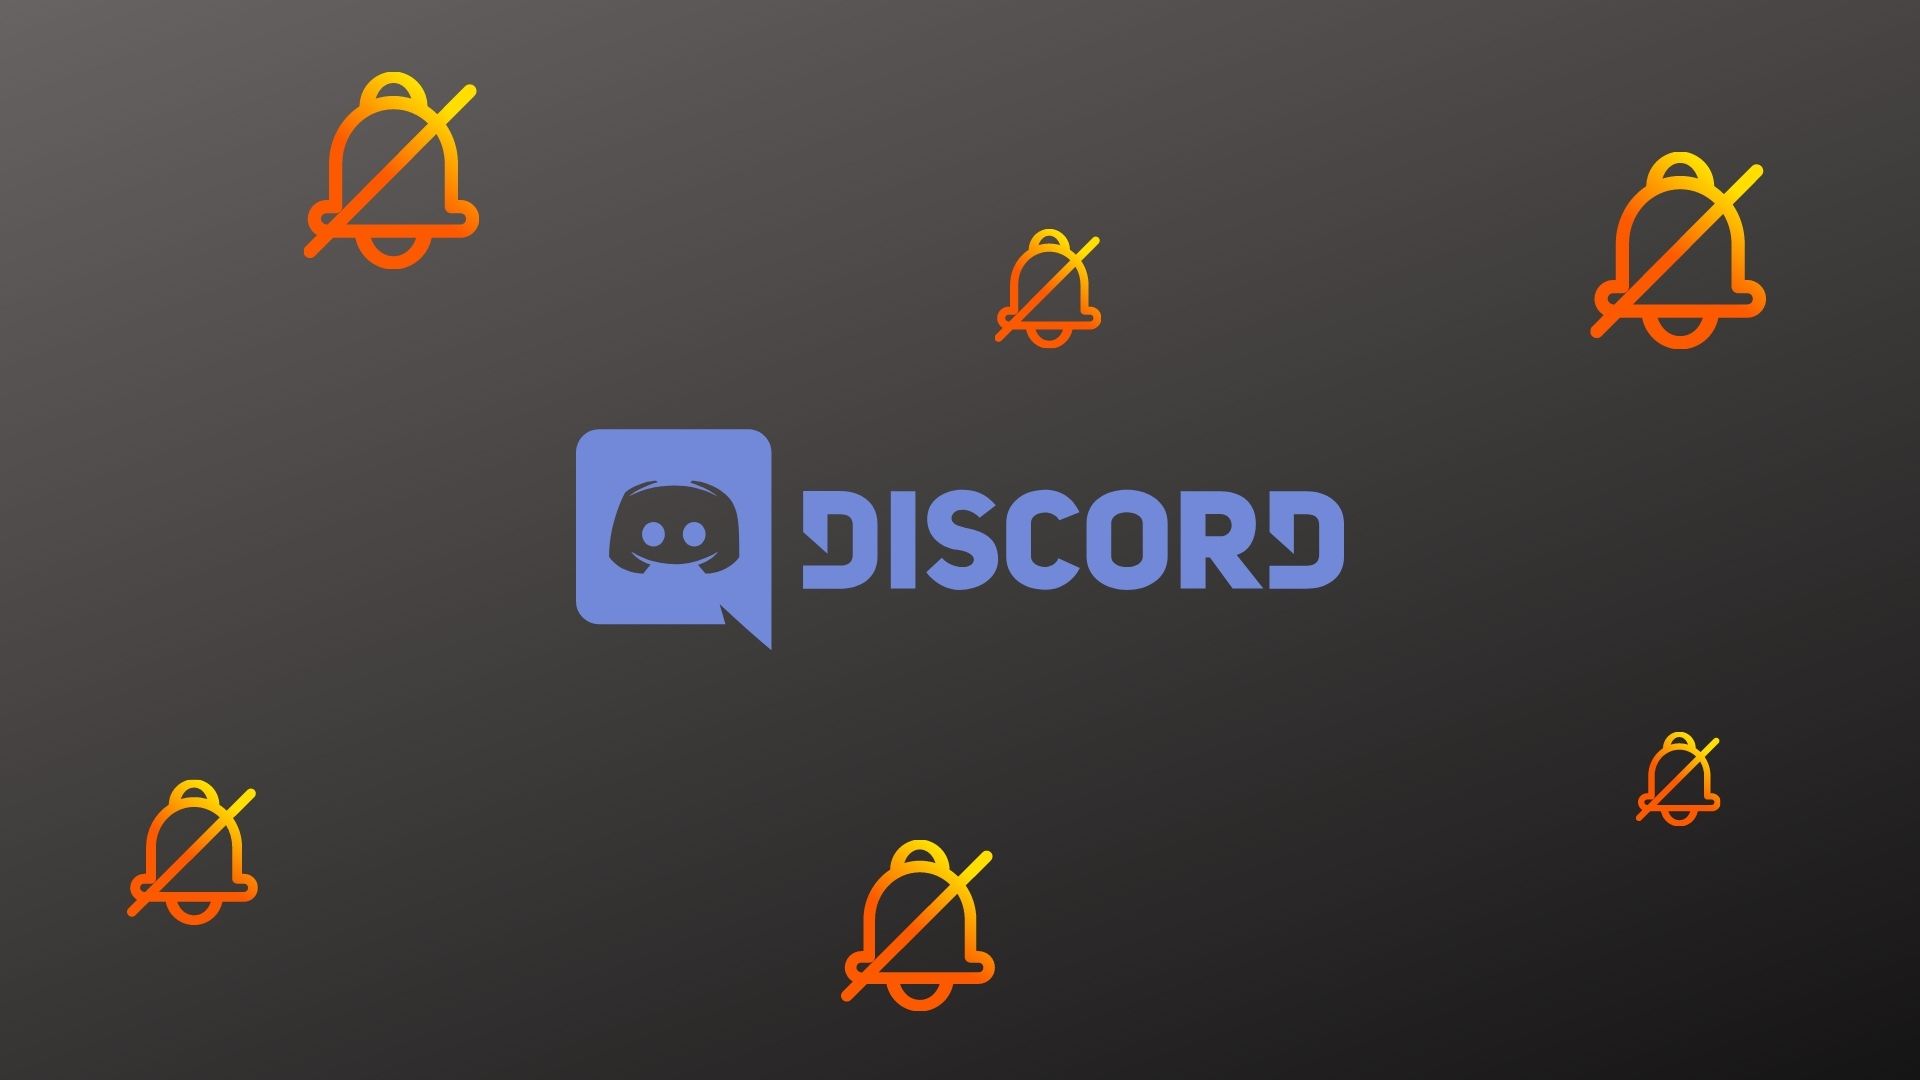 Too Many Discord Servers? Here's How to Find the Best - Partners in Fire